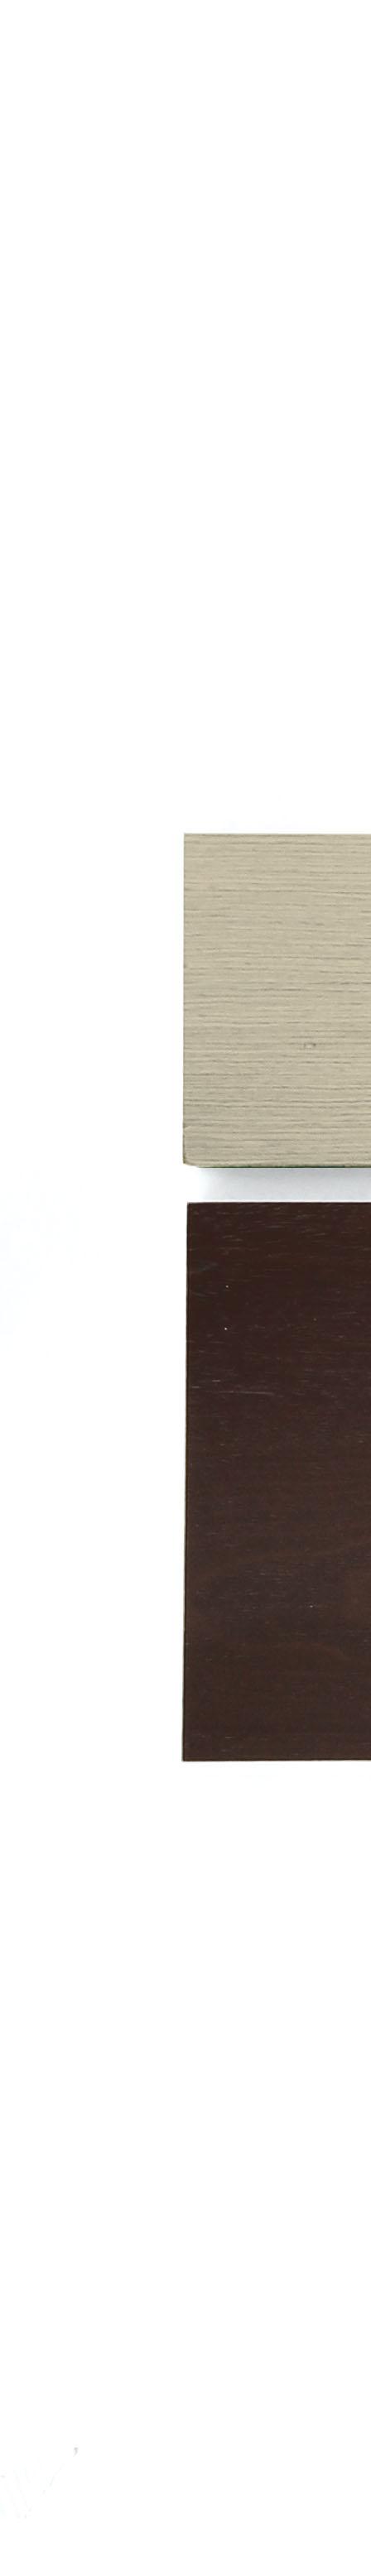 finishes flintwood veneer collection Twelve new veneer design options have been introduced to the Flintwood veneer collection, including nine rift-cut and three cathedral patterns.